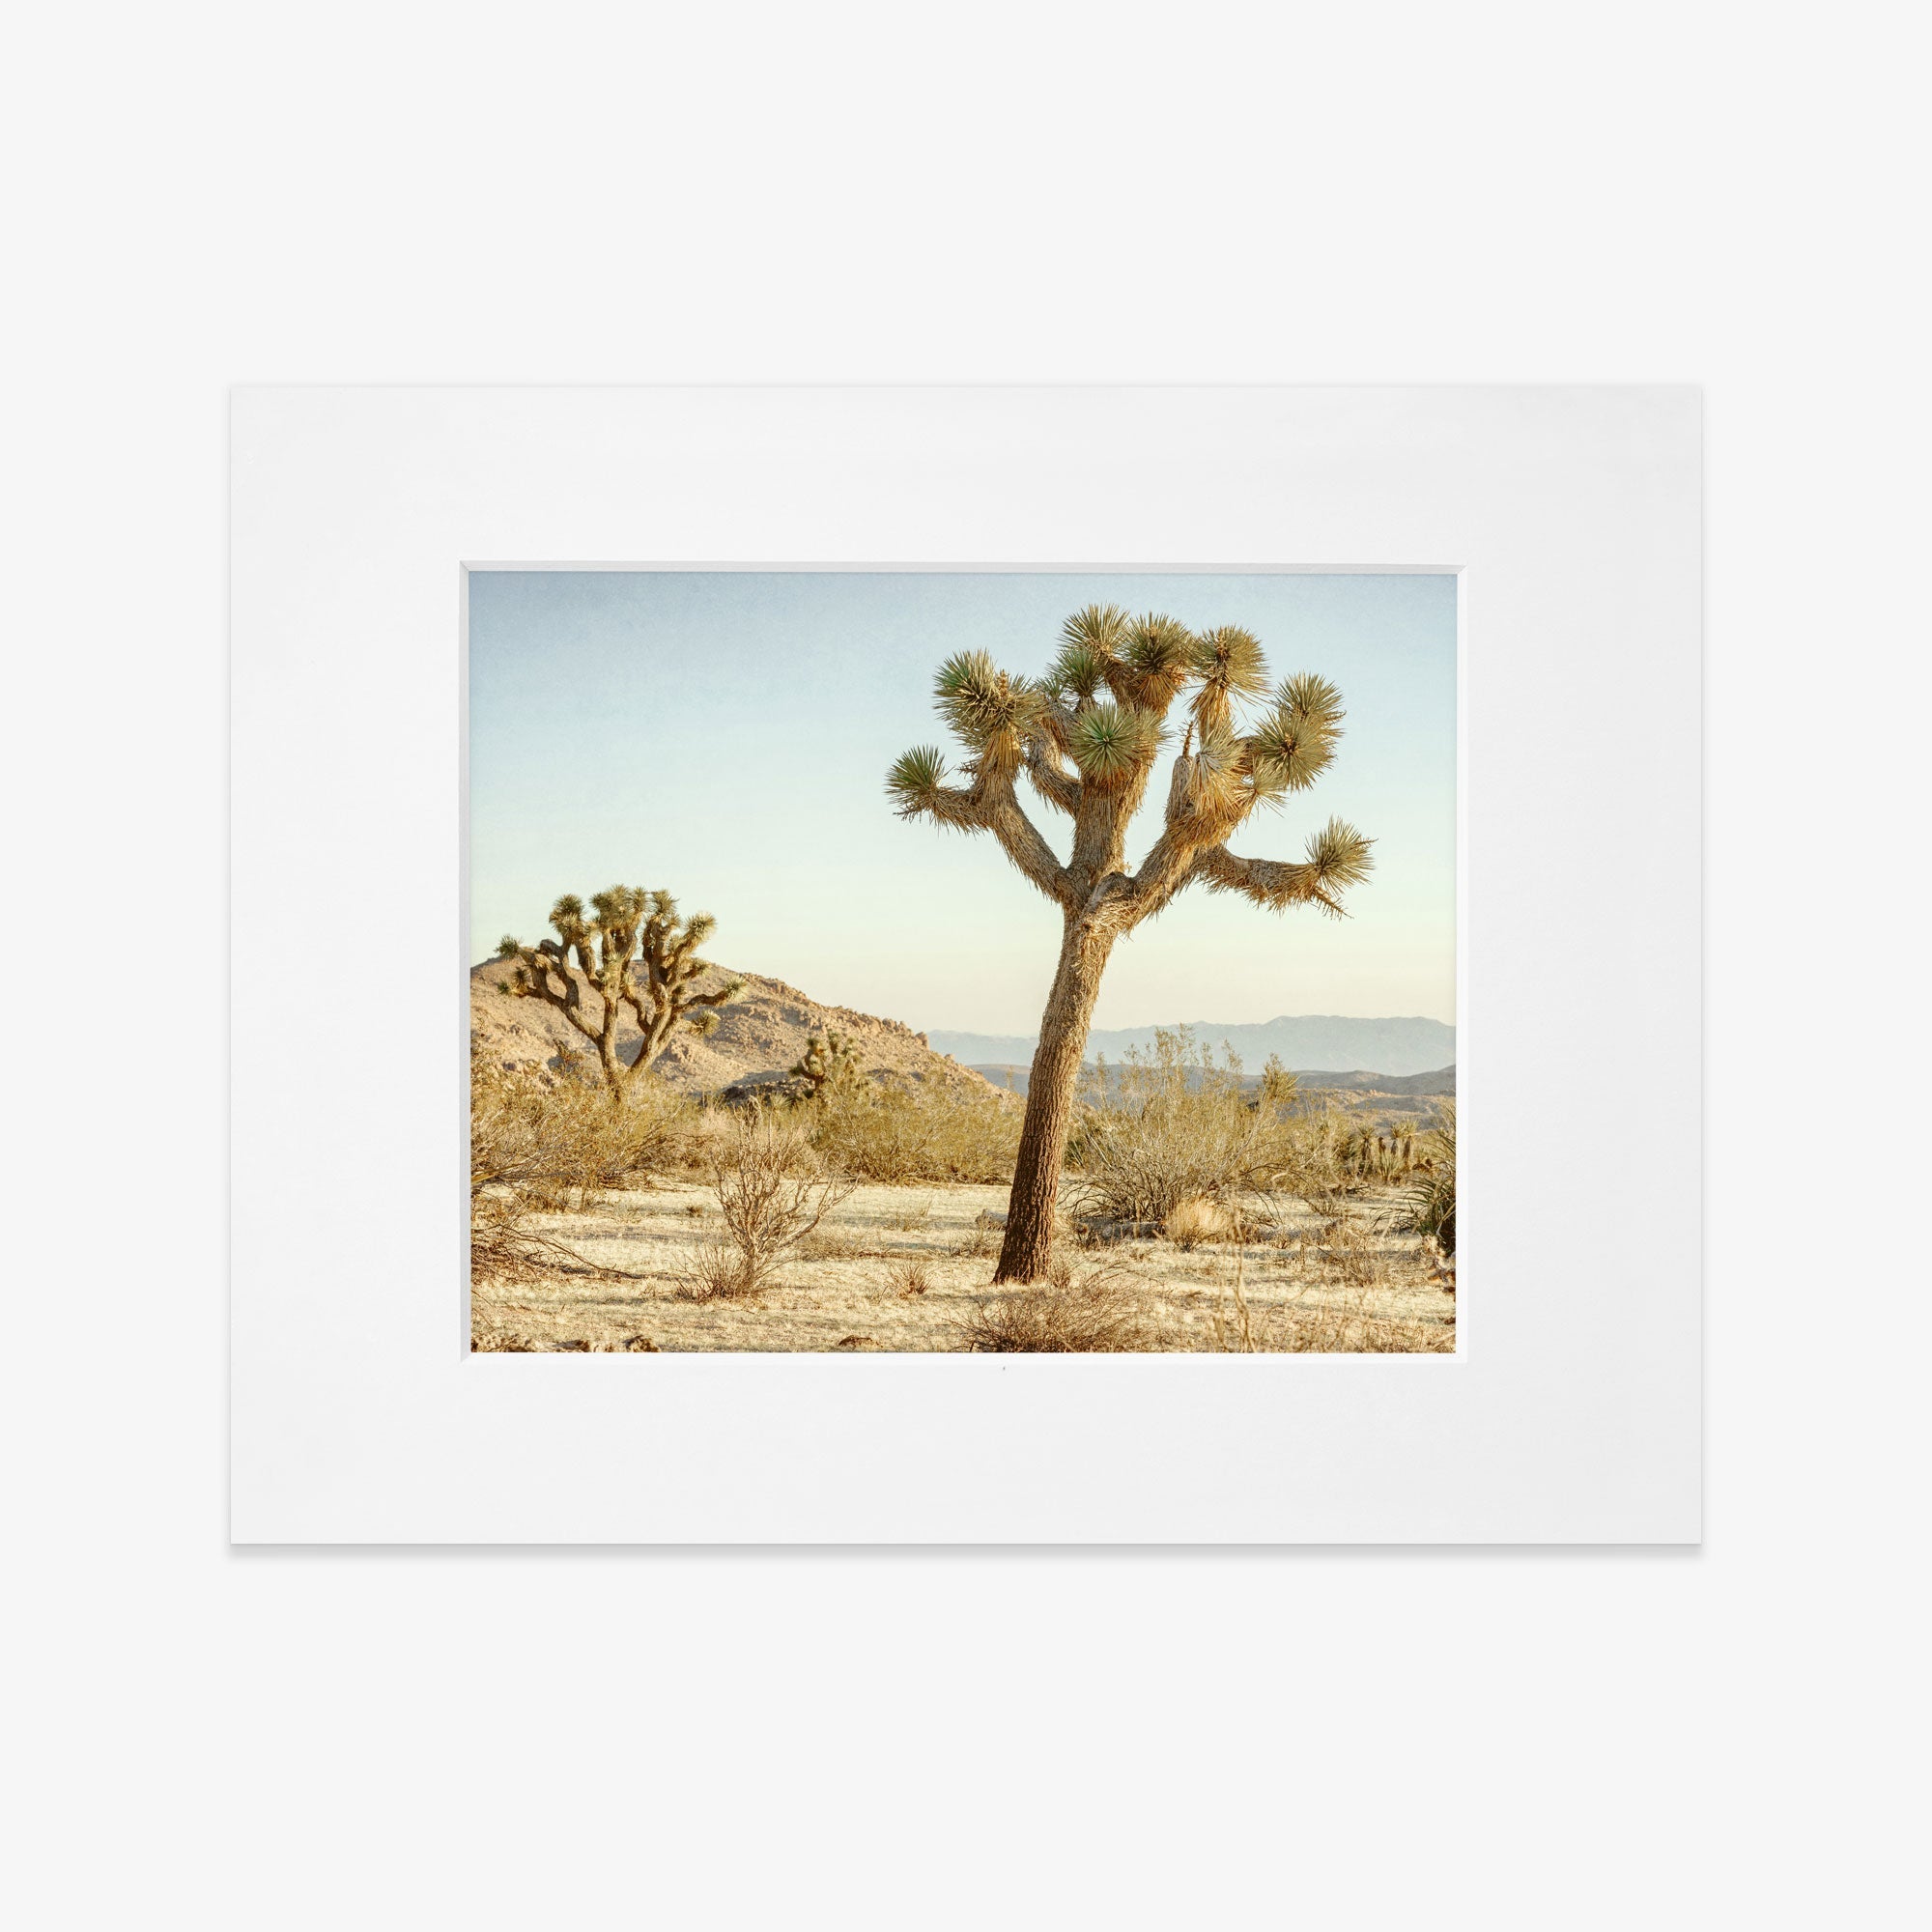 An unframed Offley Green Mighty Joshua print of a Joshua Tree in a desert landscape under a clear blue sky, capturing the unique and rugged beauty of the arid environment.